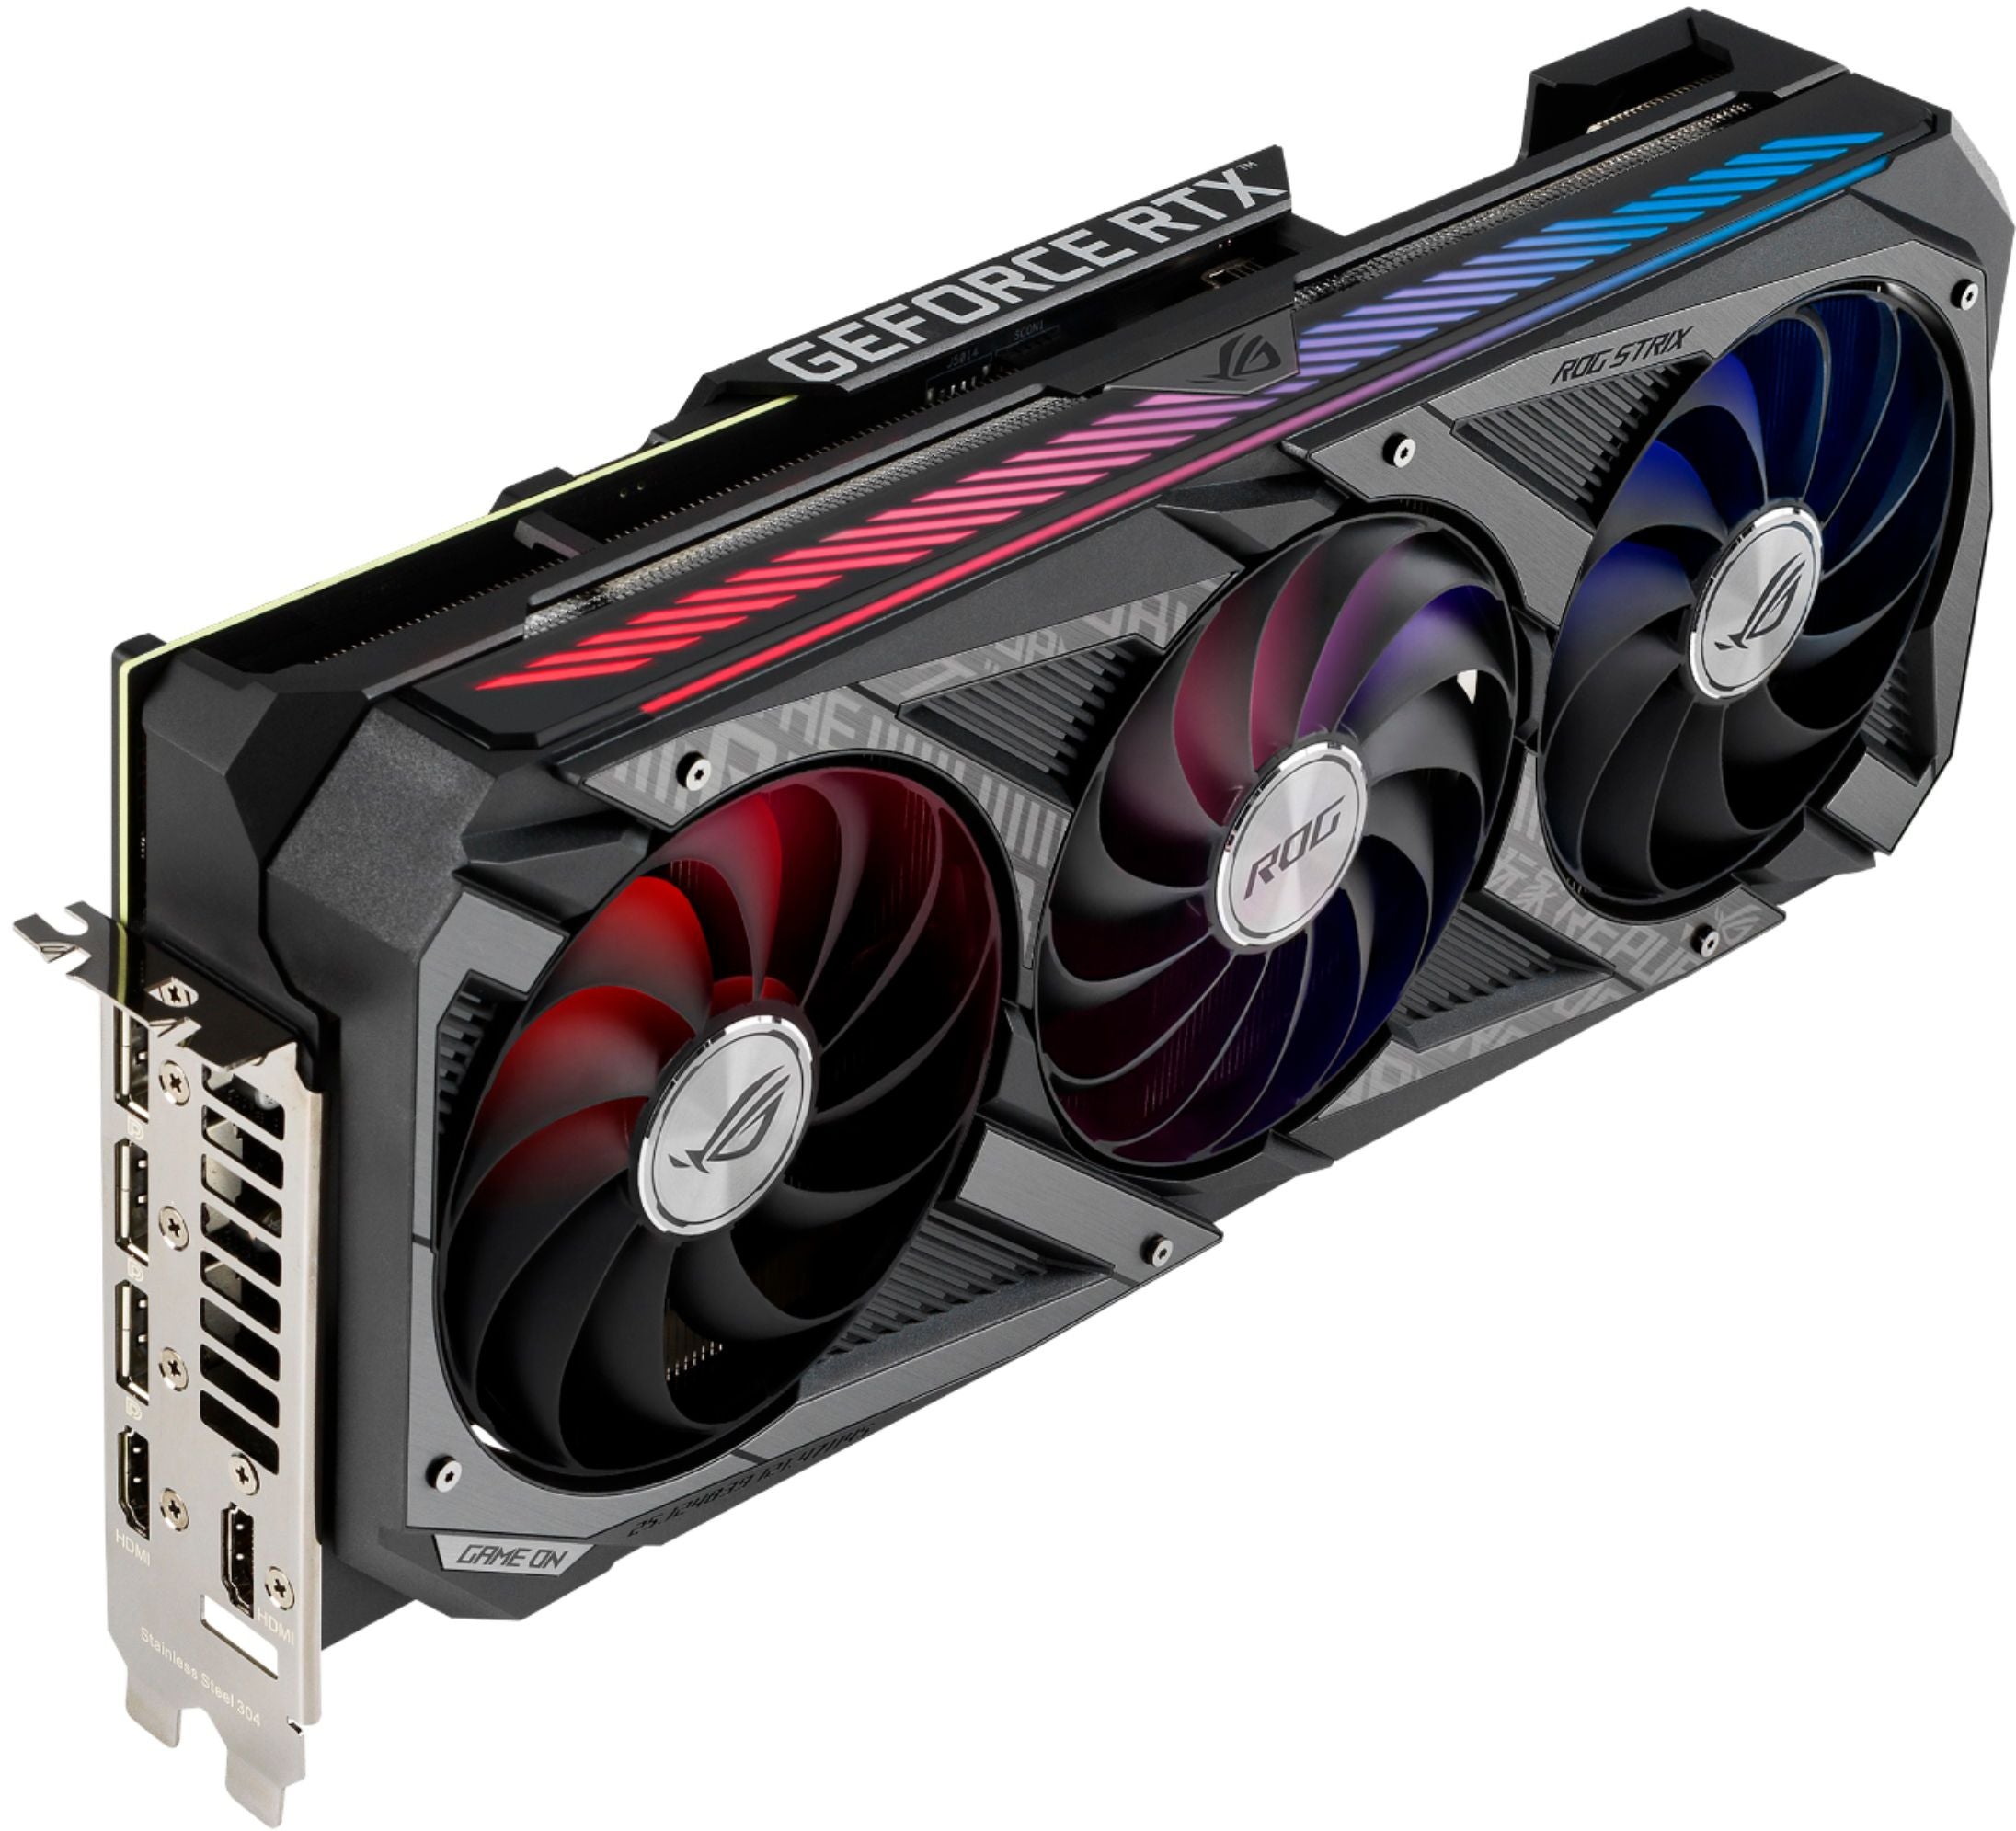 ASUS ROG Strix NVIDIA GeForce RTX 3080 Ti OC Edition Gaming (PCIe 4.0/12 Go GDDR6X/HDMI 2.1/Axial-tech Fan Design/2.9-Slot, Super Alloy Power II/ASUS Auto-Extreme Technology)